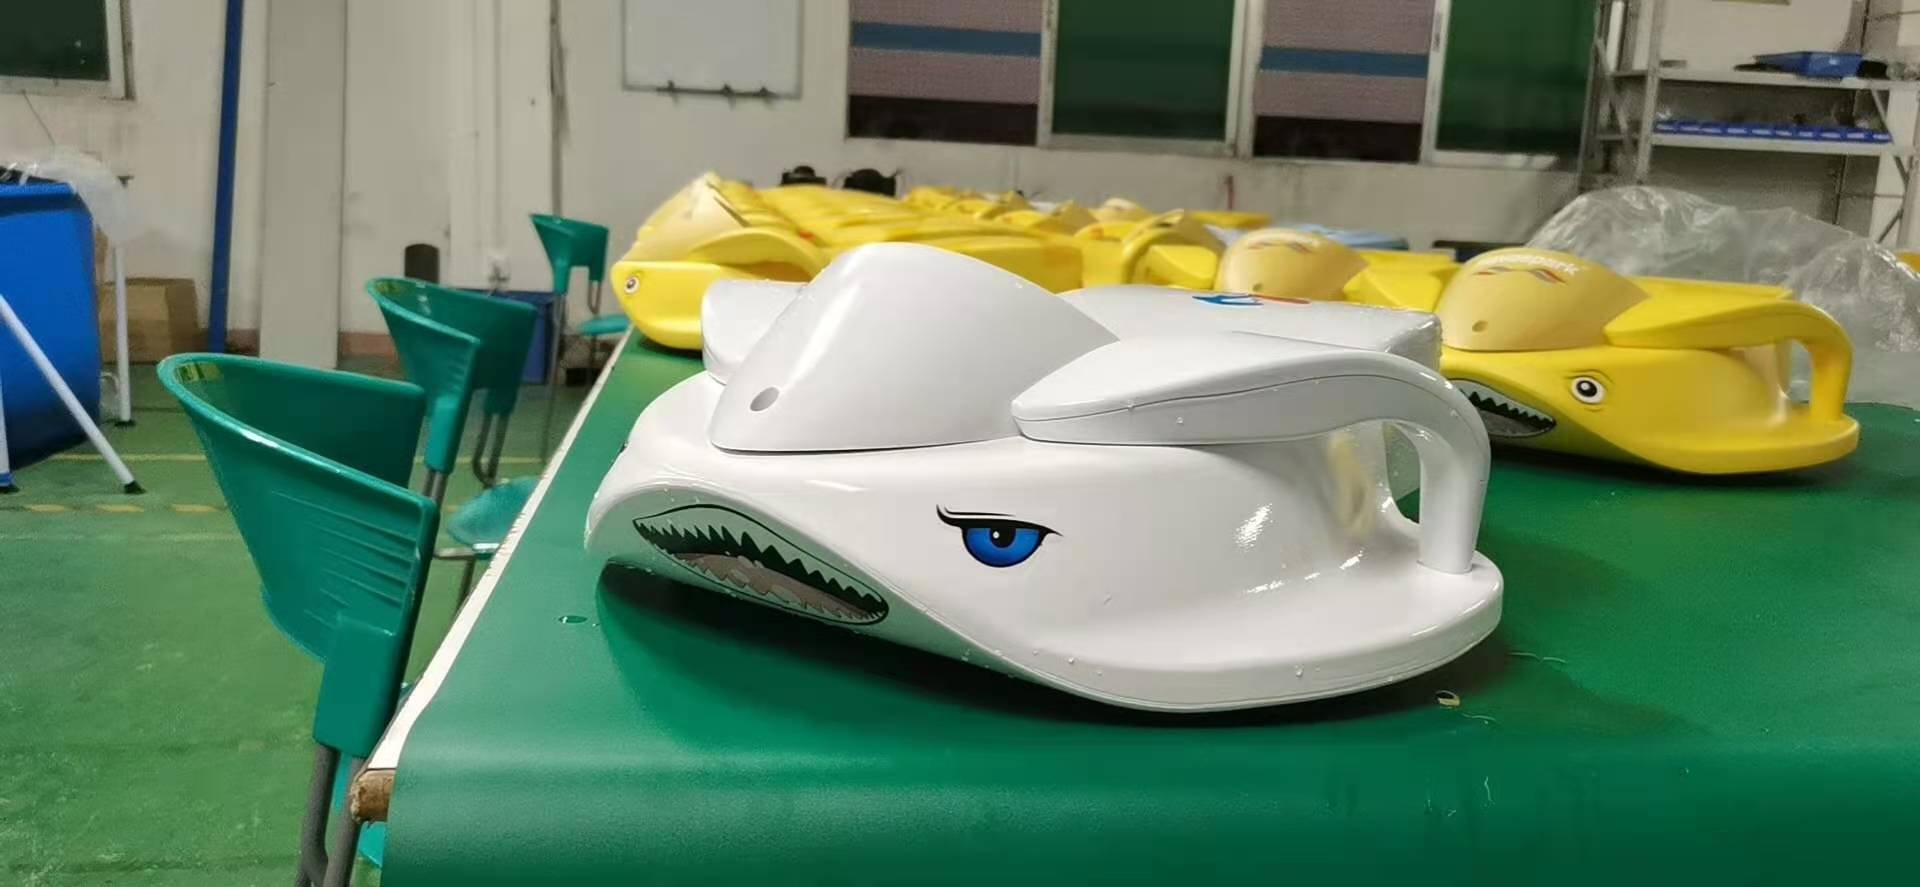 Camoro Water Sports  Motor mini electric hydrofoil surfboard for kids | Electrr Inc